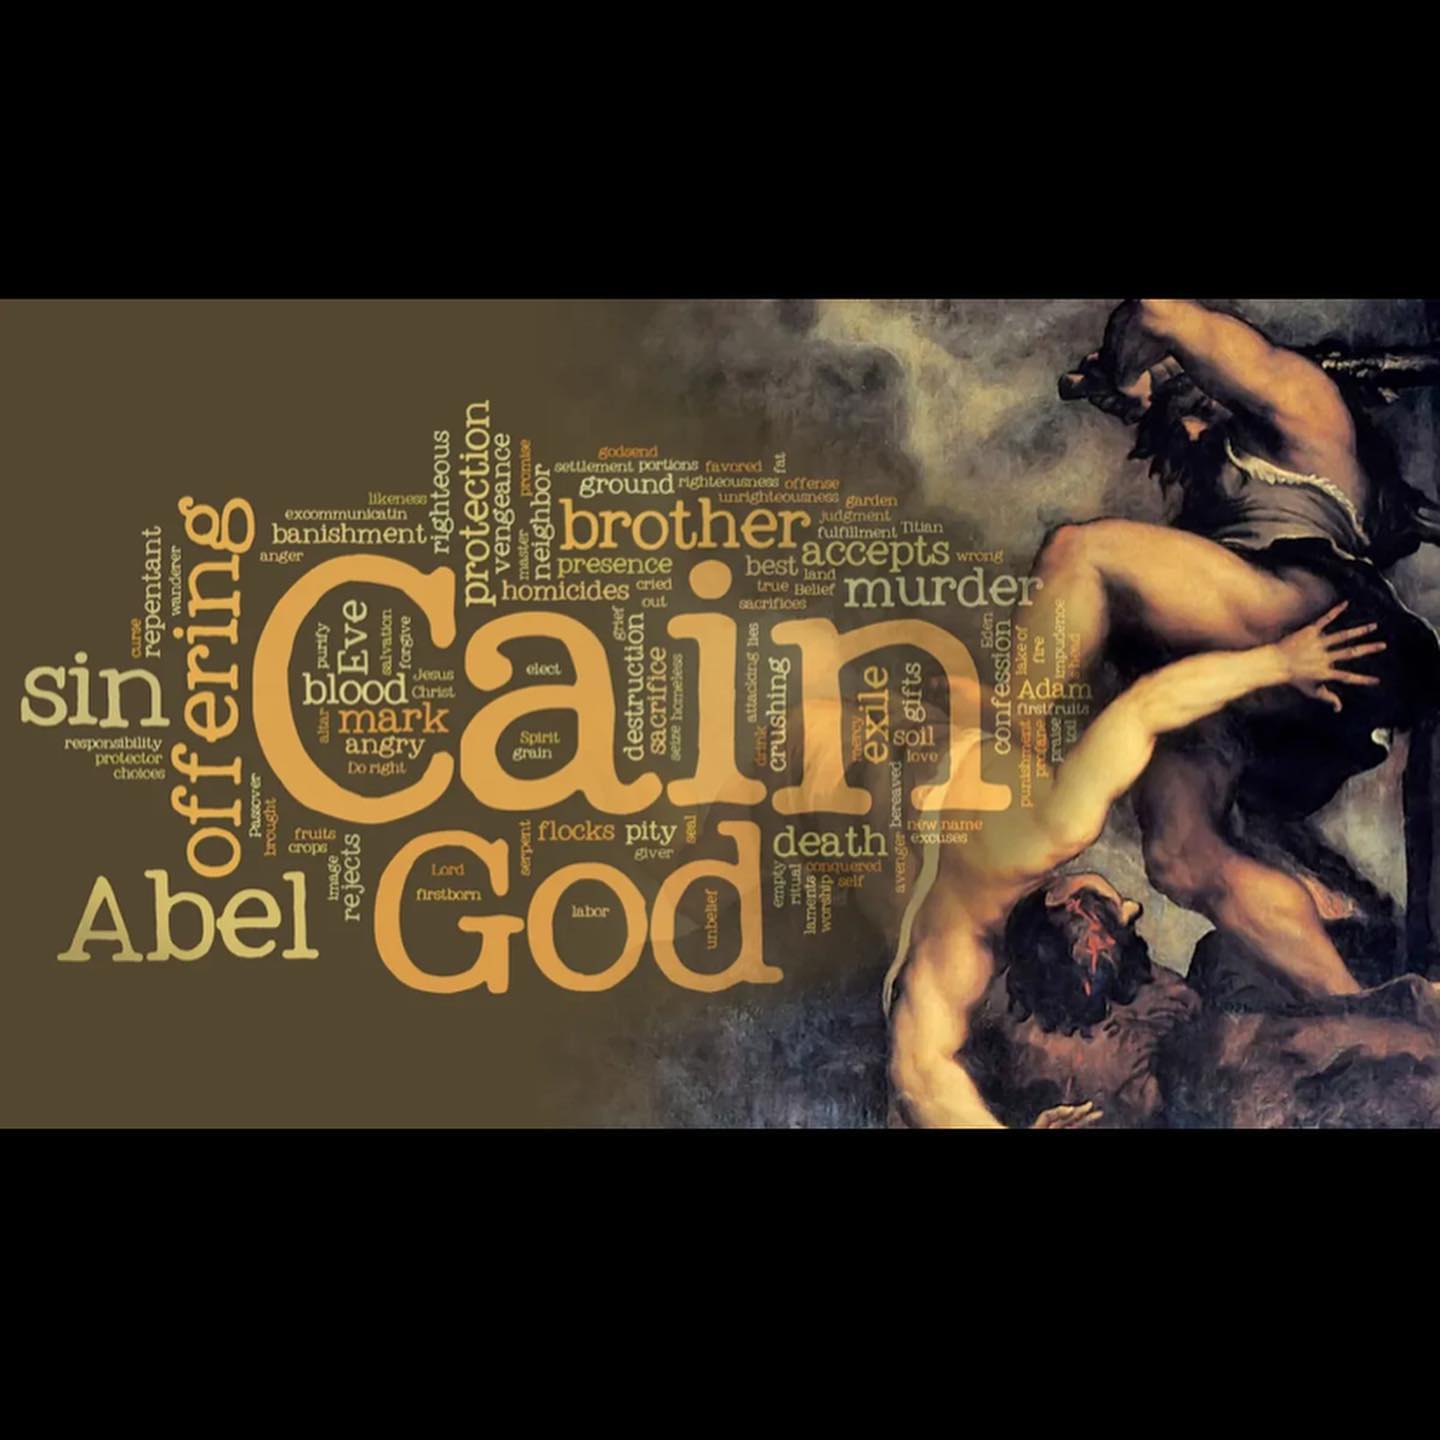 As we approach the story of Cain & Abel, there are several dynamic characters in these two short action-packed chapters! To prepare for Sunday’s teaching, you’re encouraged to read Genesis 4 and 5. Put yourself in the story. Who and what do you identify with? What actions? What motives? What tendencies? What emotions? Join us Sunday 10AM @fallbrookvineyardchurch for worship and an engaging teaching from our friend, Pastor Jason Neese @neese4prez entitled “The Fall and Rise of the Family”.We will gather in the olive grove 🌳 Please remember to bring your chairs.The @thevineyard1924 is open so, let’s enjoy lunch and fellowship after church! #cainandabel#genesis#adamandeve#thefallofthefamily#genealogymatters#heartofworship#wordofgod#thewaythetruththelife#worship#prayer #praise#praisethelord#community #support #love#familyofgod #outdoorchurch #organicchurch #outlawchurch #dogfriendlychurch